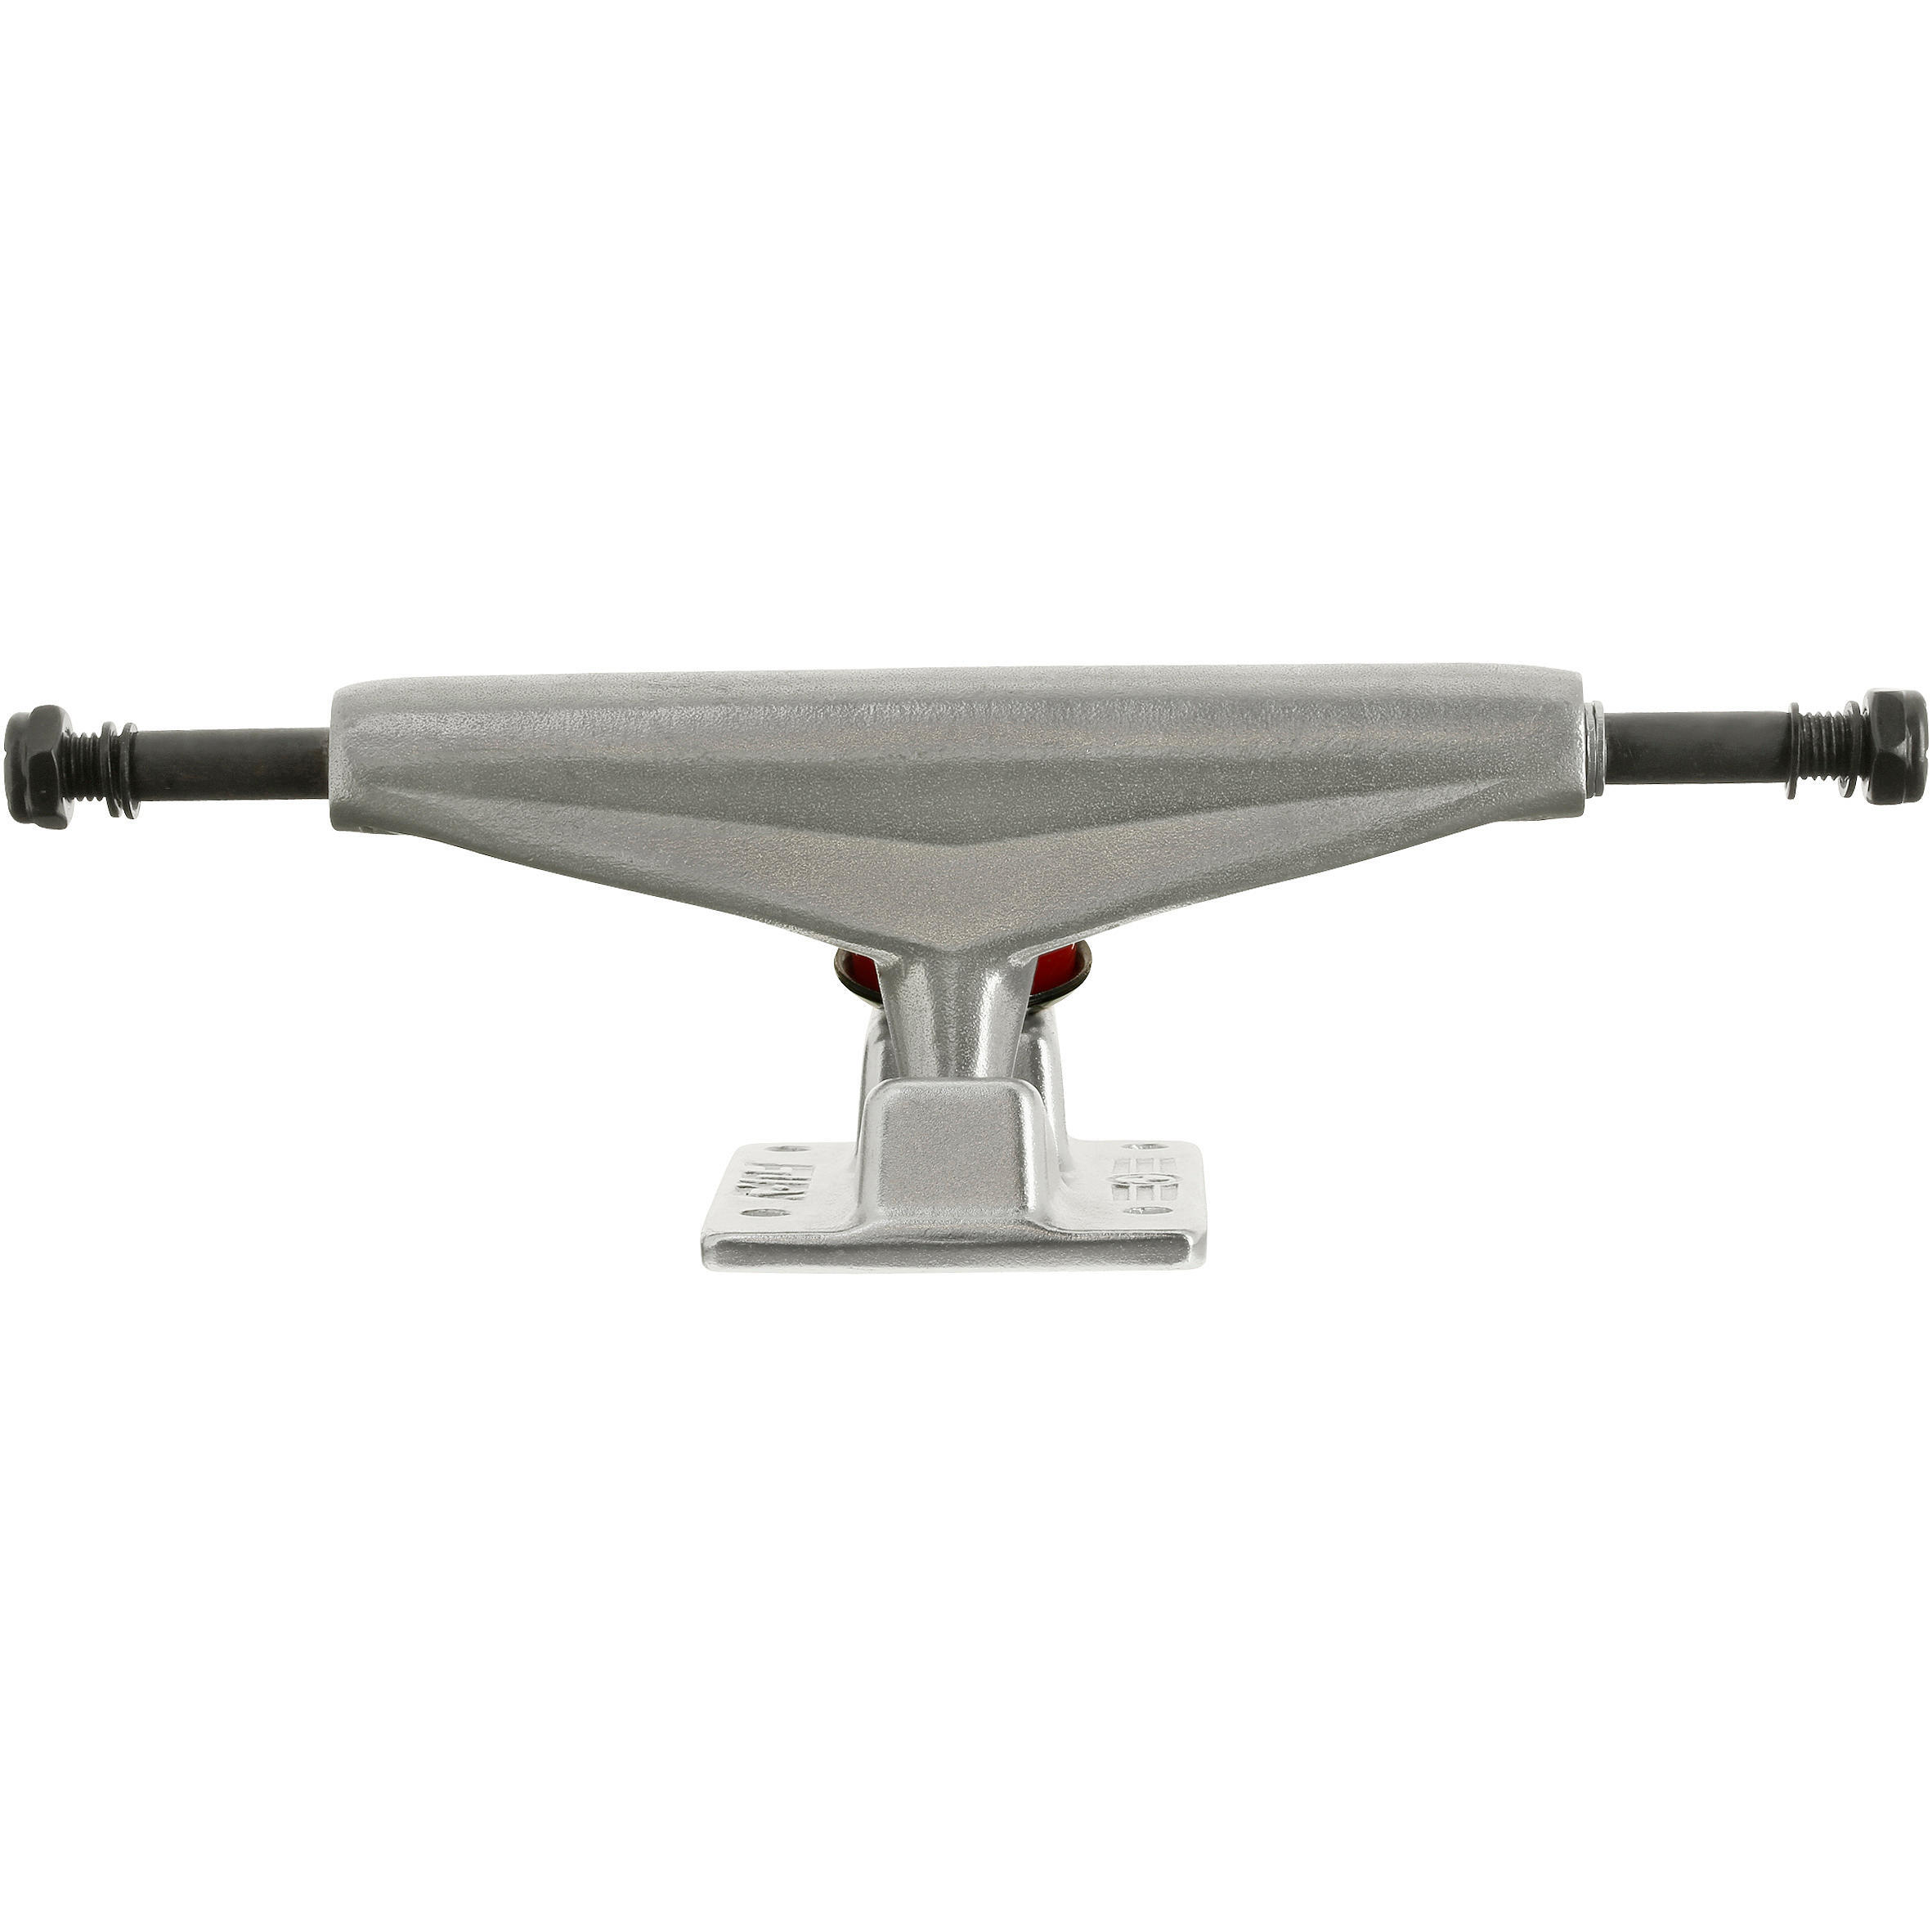 OXELO Fury Skateboard Forged Baseplate Truck Size 8"/20.32 mm